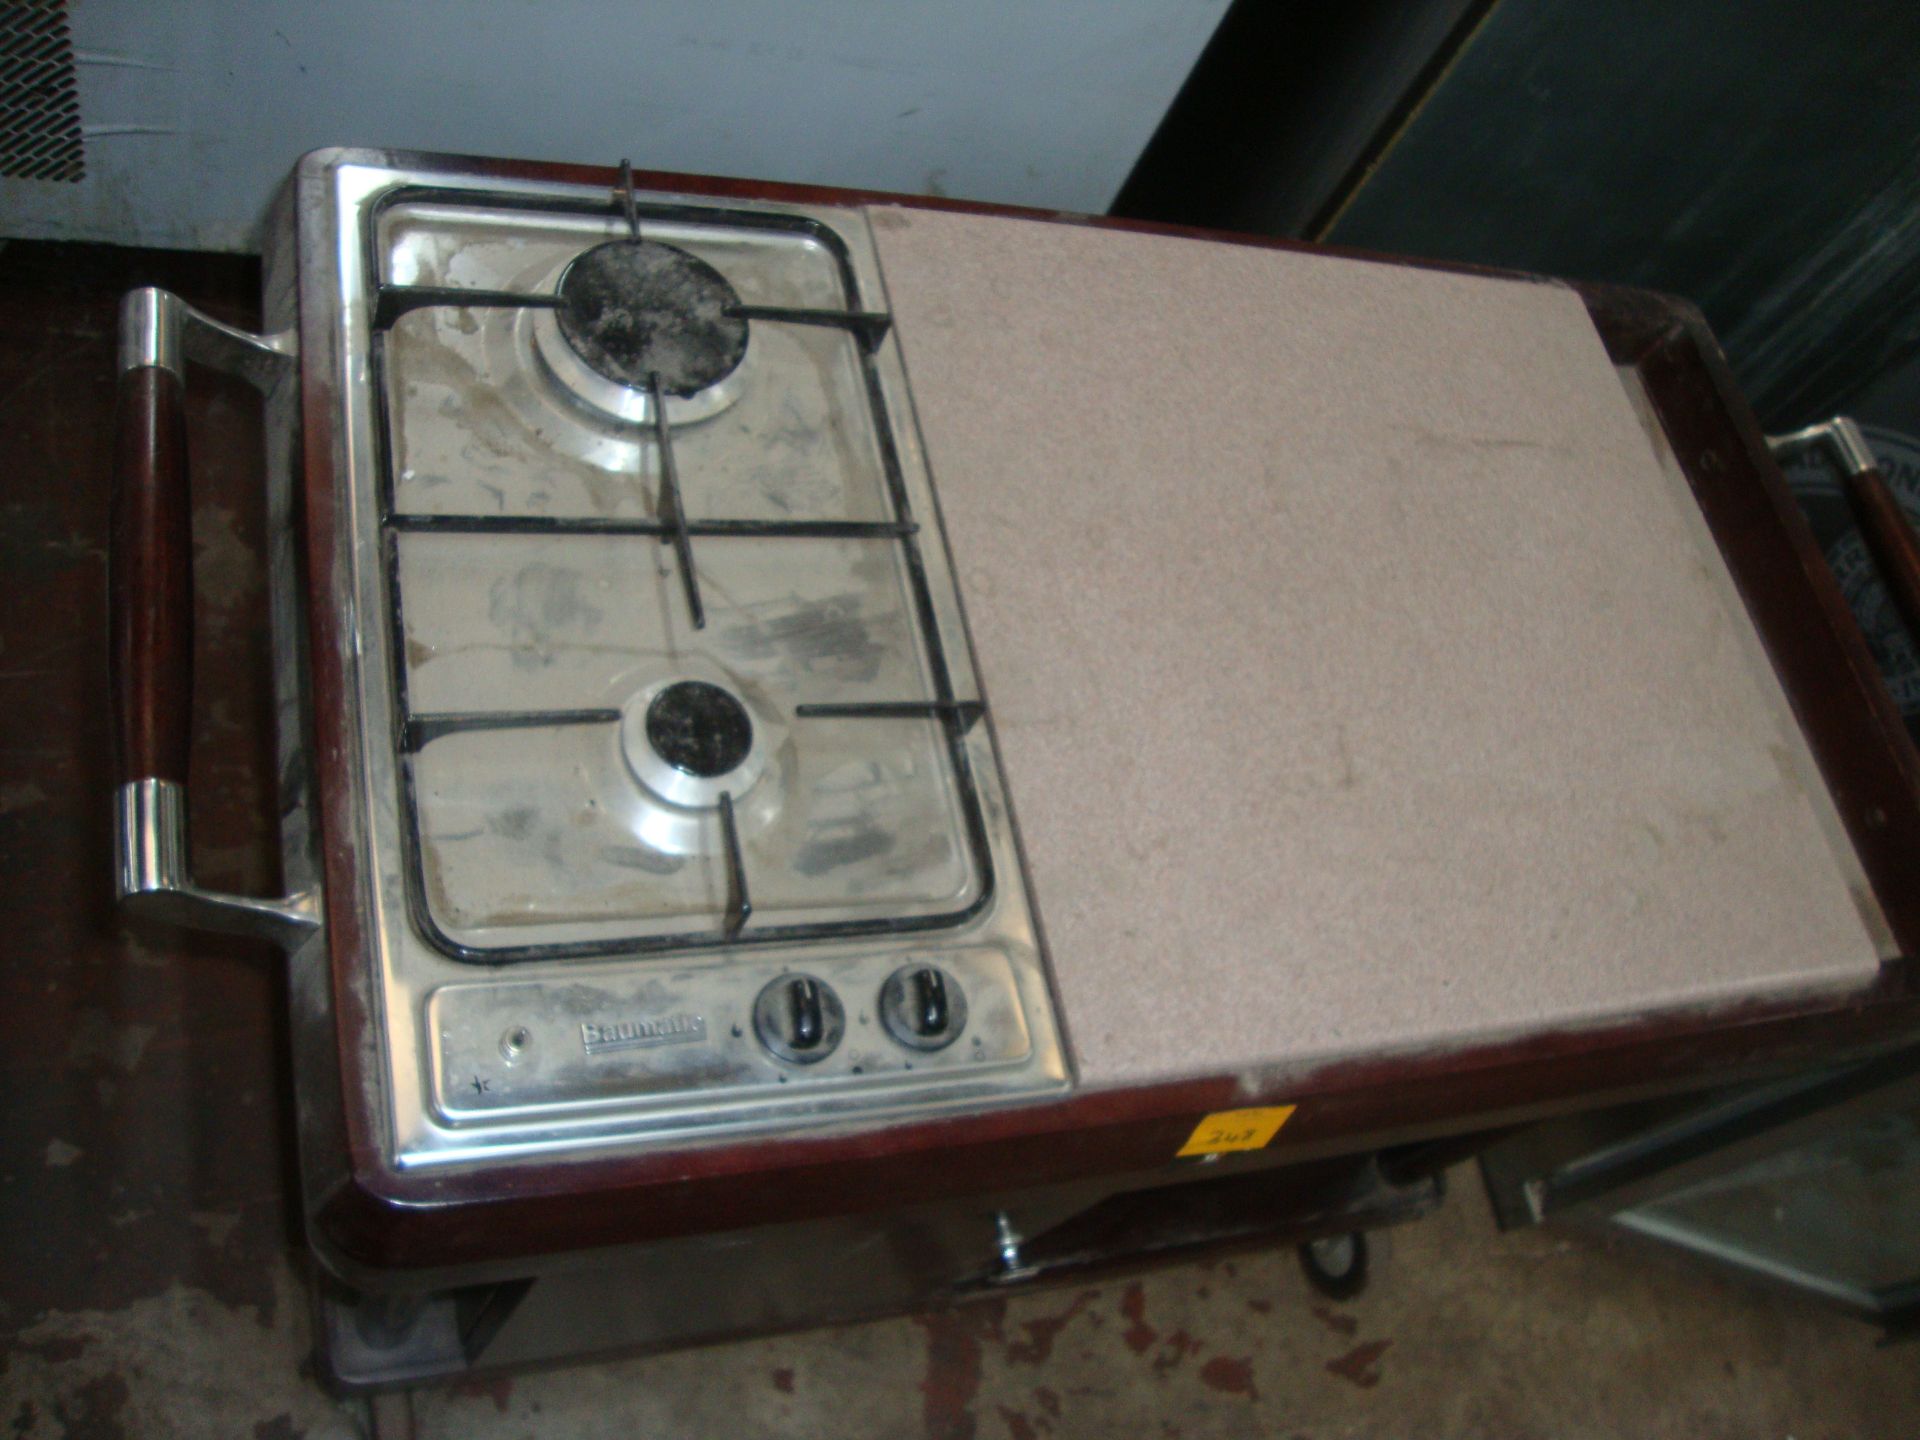 Baumatic serving trolley with built-in twin gas hobIMPORTANT: Please remember goods successfully bid - Image 3 of 3